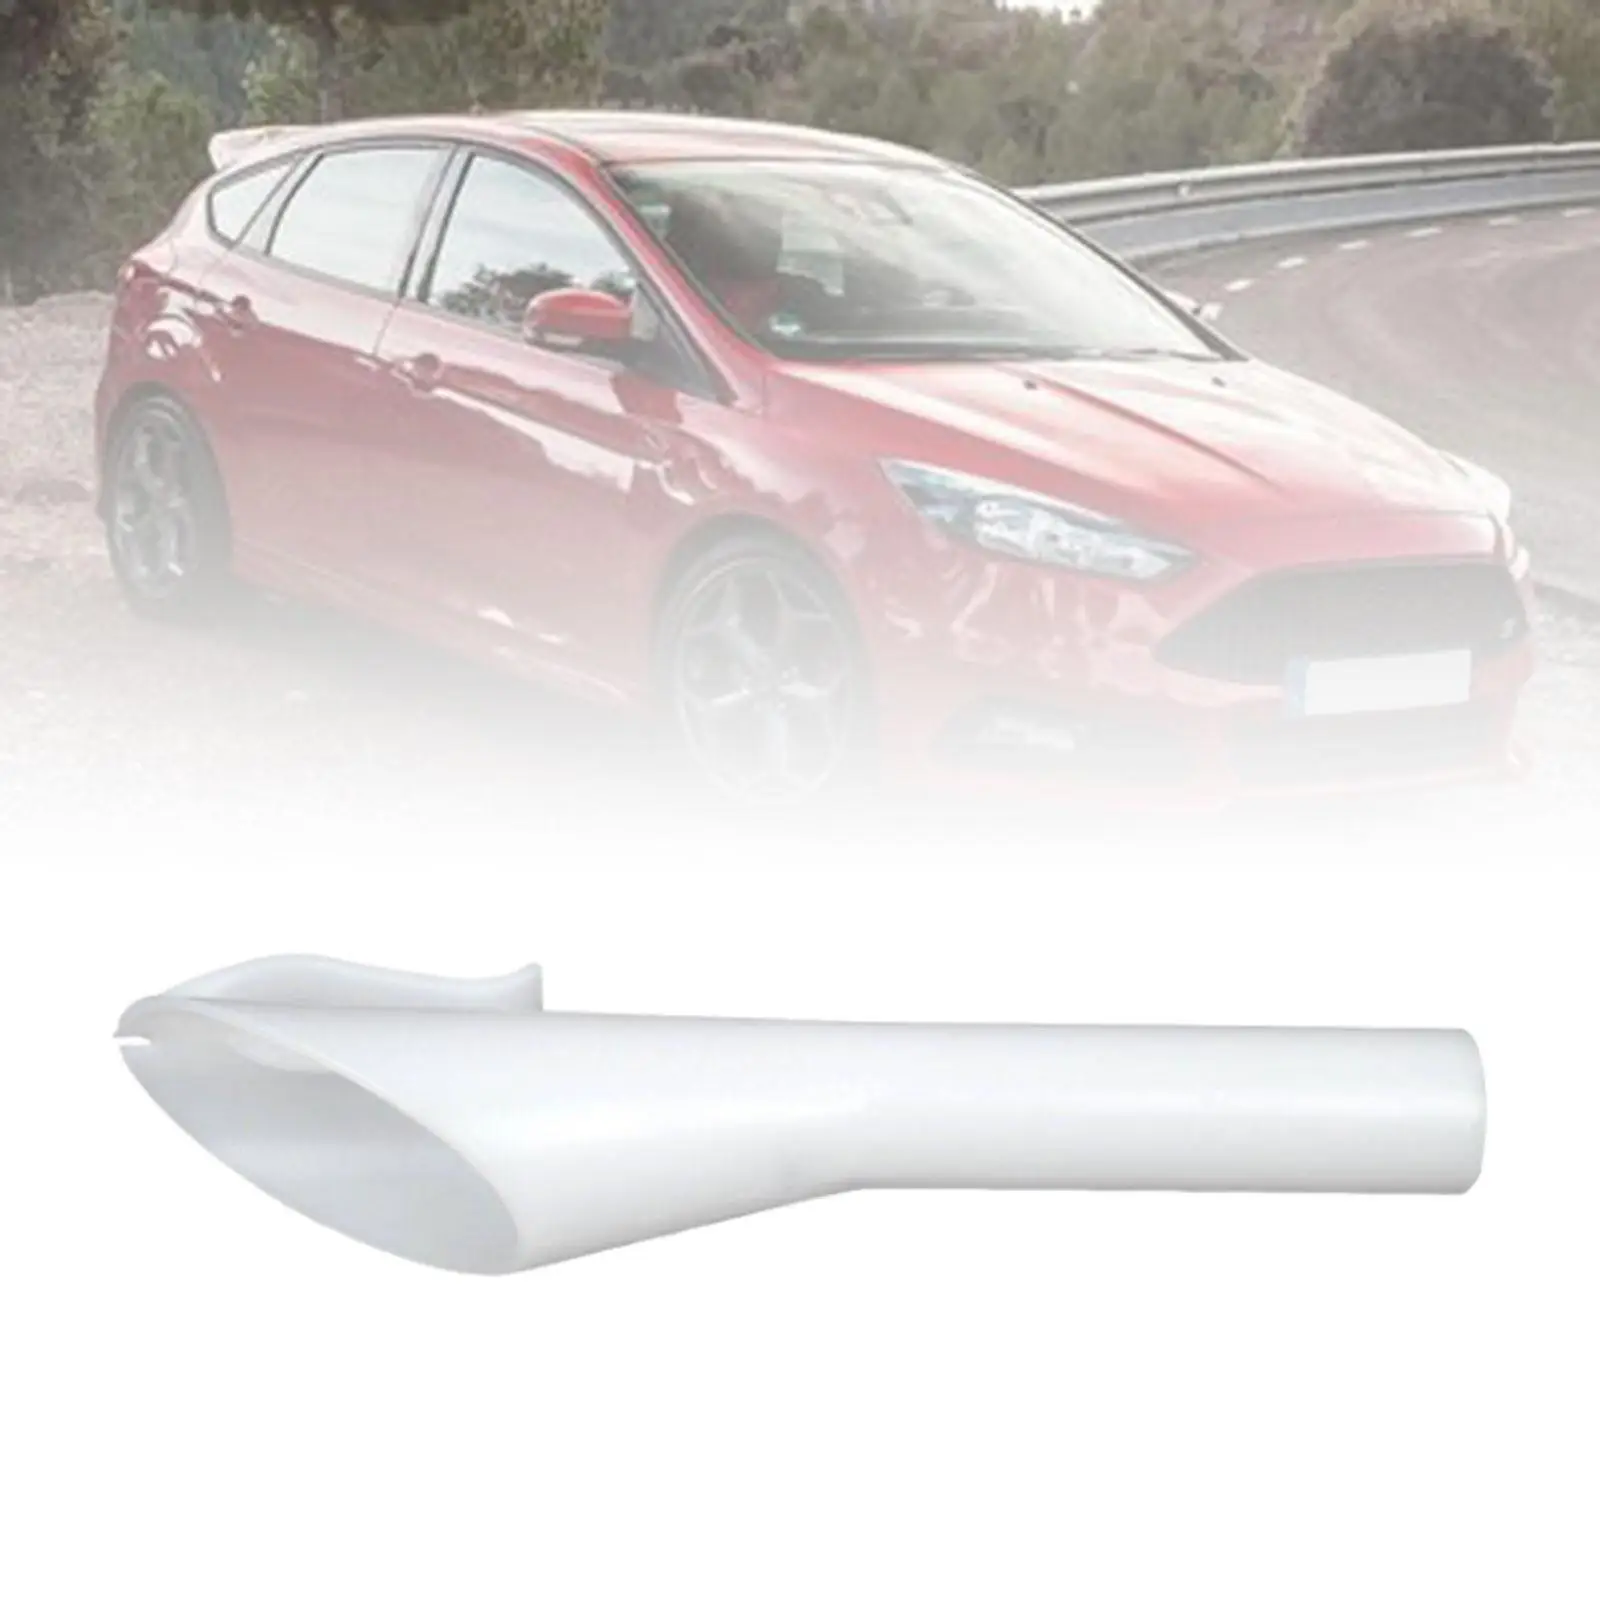 Fuel Fill Funnel Easy to Mount Fuel Tank Filler Neck Sleeve for Ford Petrol Emergency Fuel Filler Funnel Kuga C Max B Max